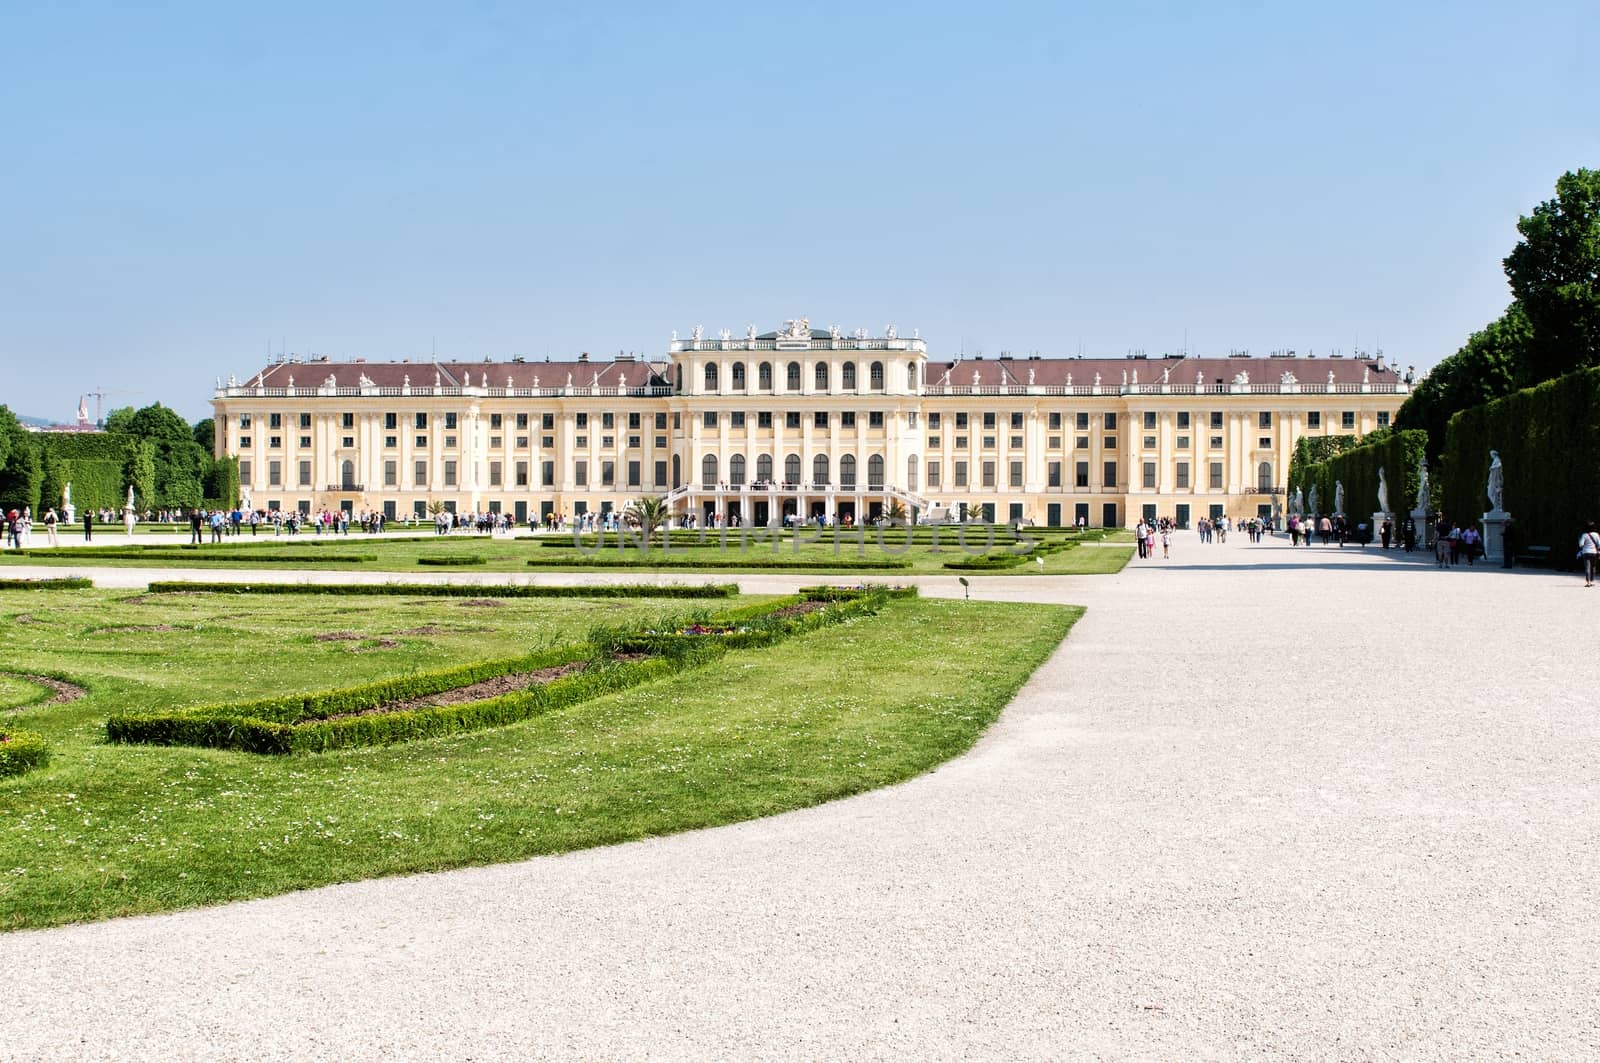 VIENNA Schonbrunn palace and gardens. Schonbrunn Palace is a World Cultural Heritage site and Austria's most-visited sight. by mitakag